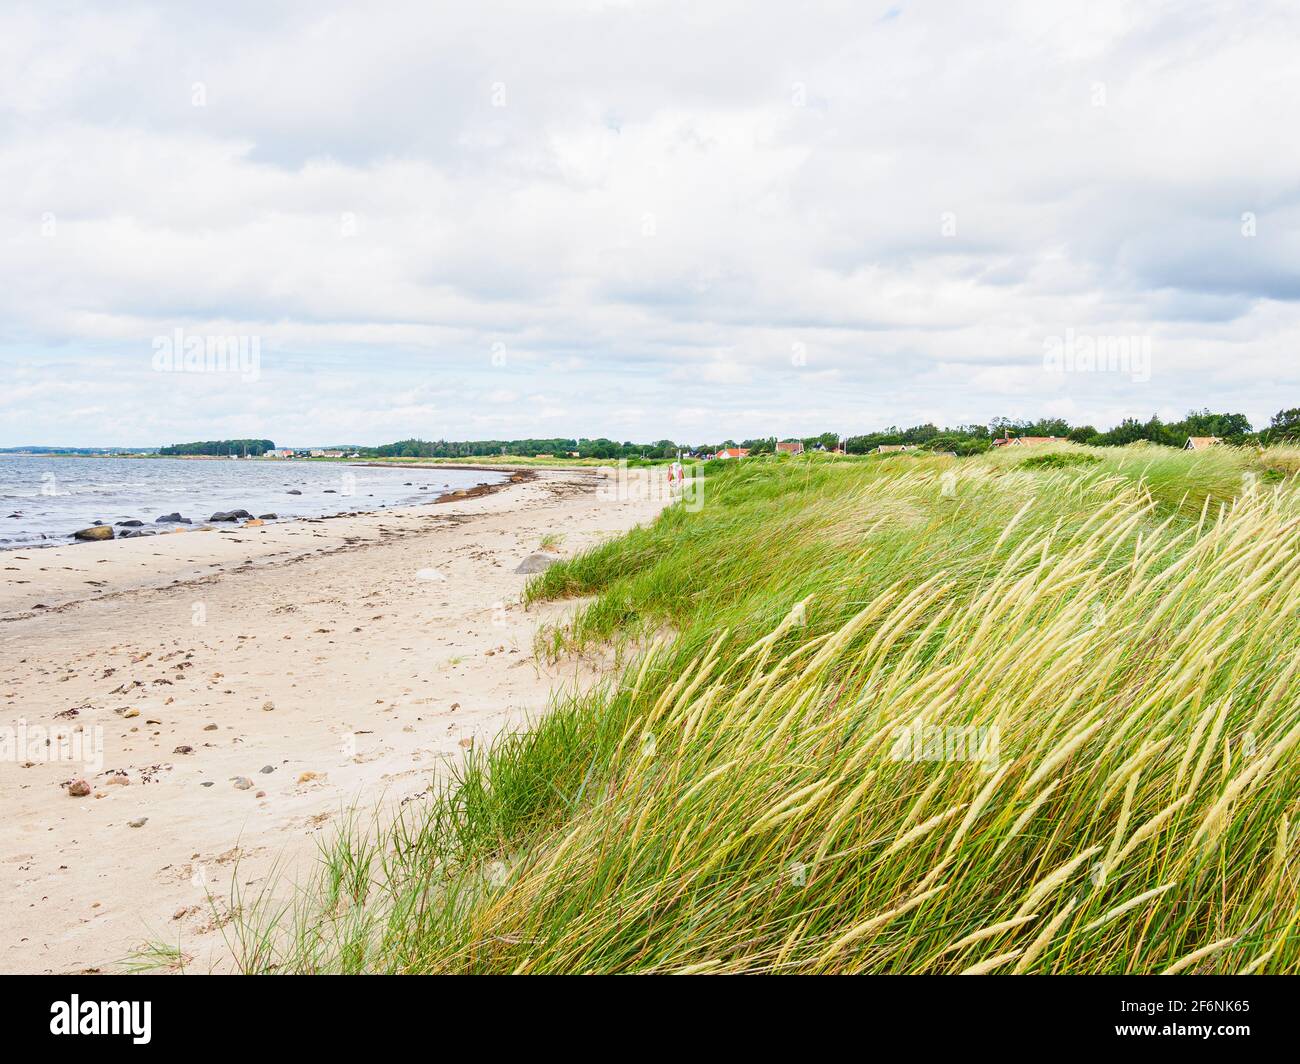 Beach on the southern region of Sweden Stock Photo